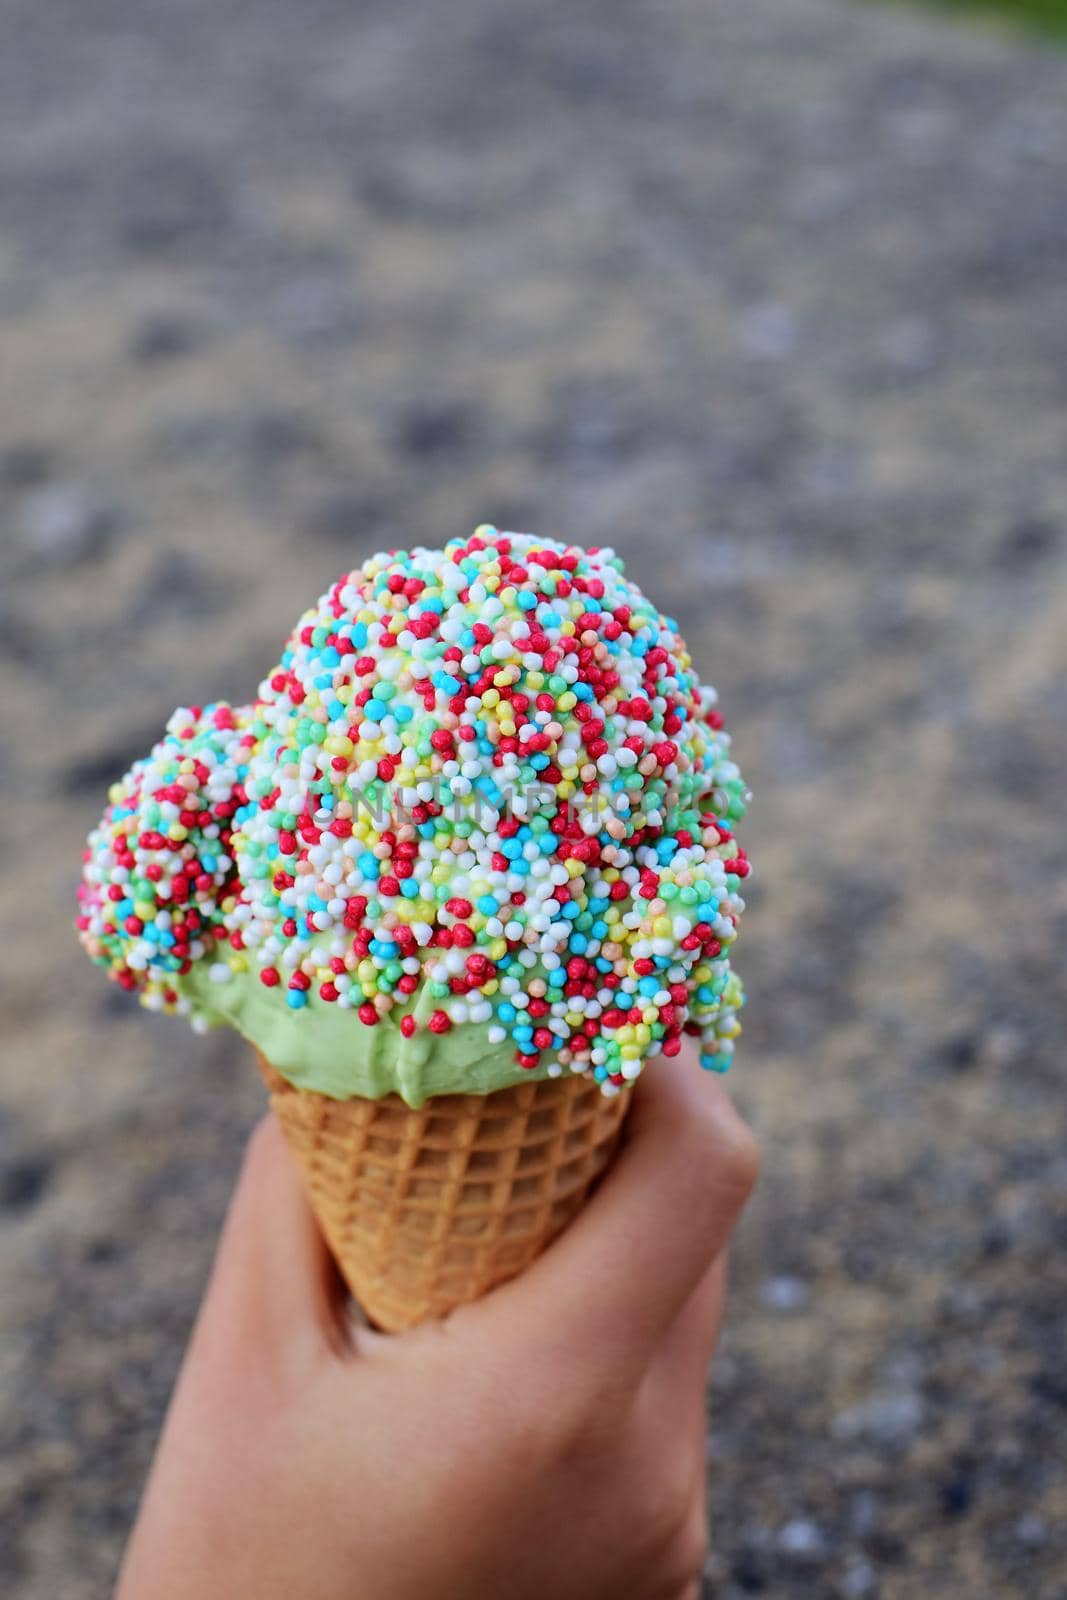 Ice cream with colorful sugar sprinkles in hand as a close-up by Luise123